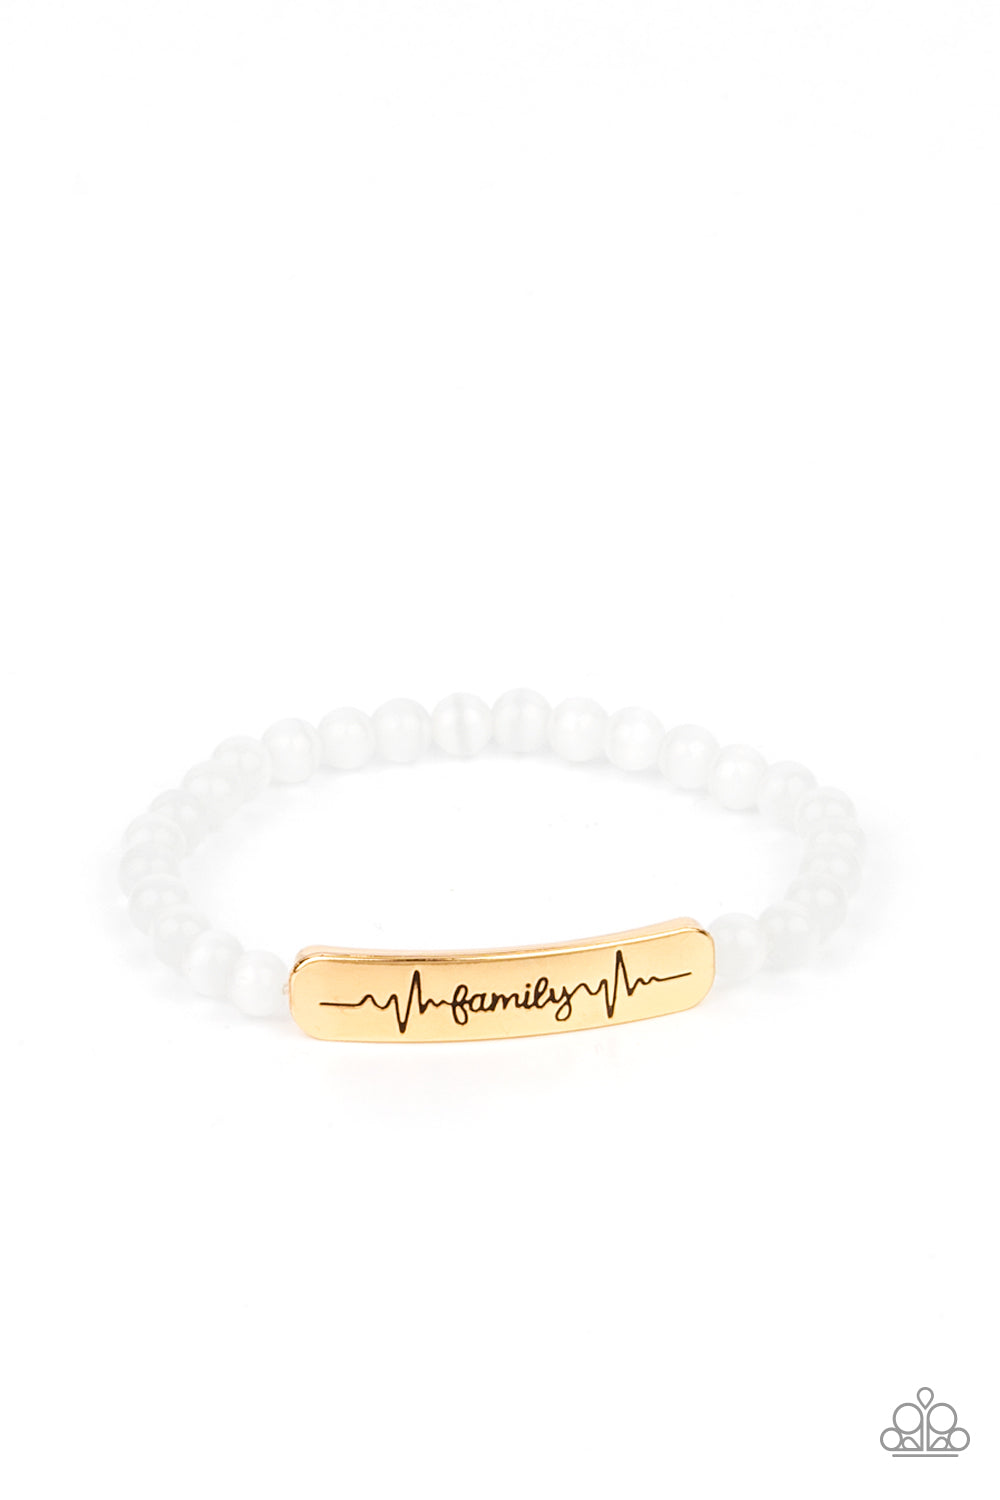 Paparazzi Bracelets - Family is Forever - Gold